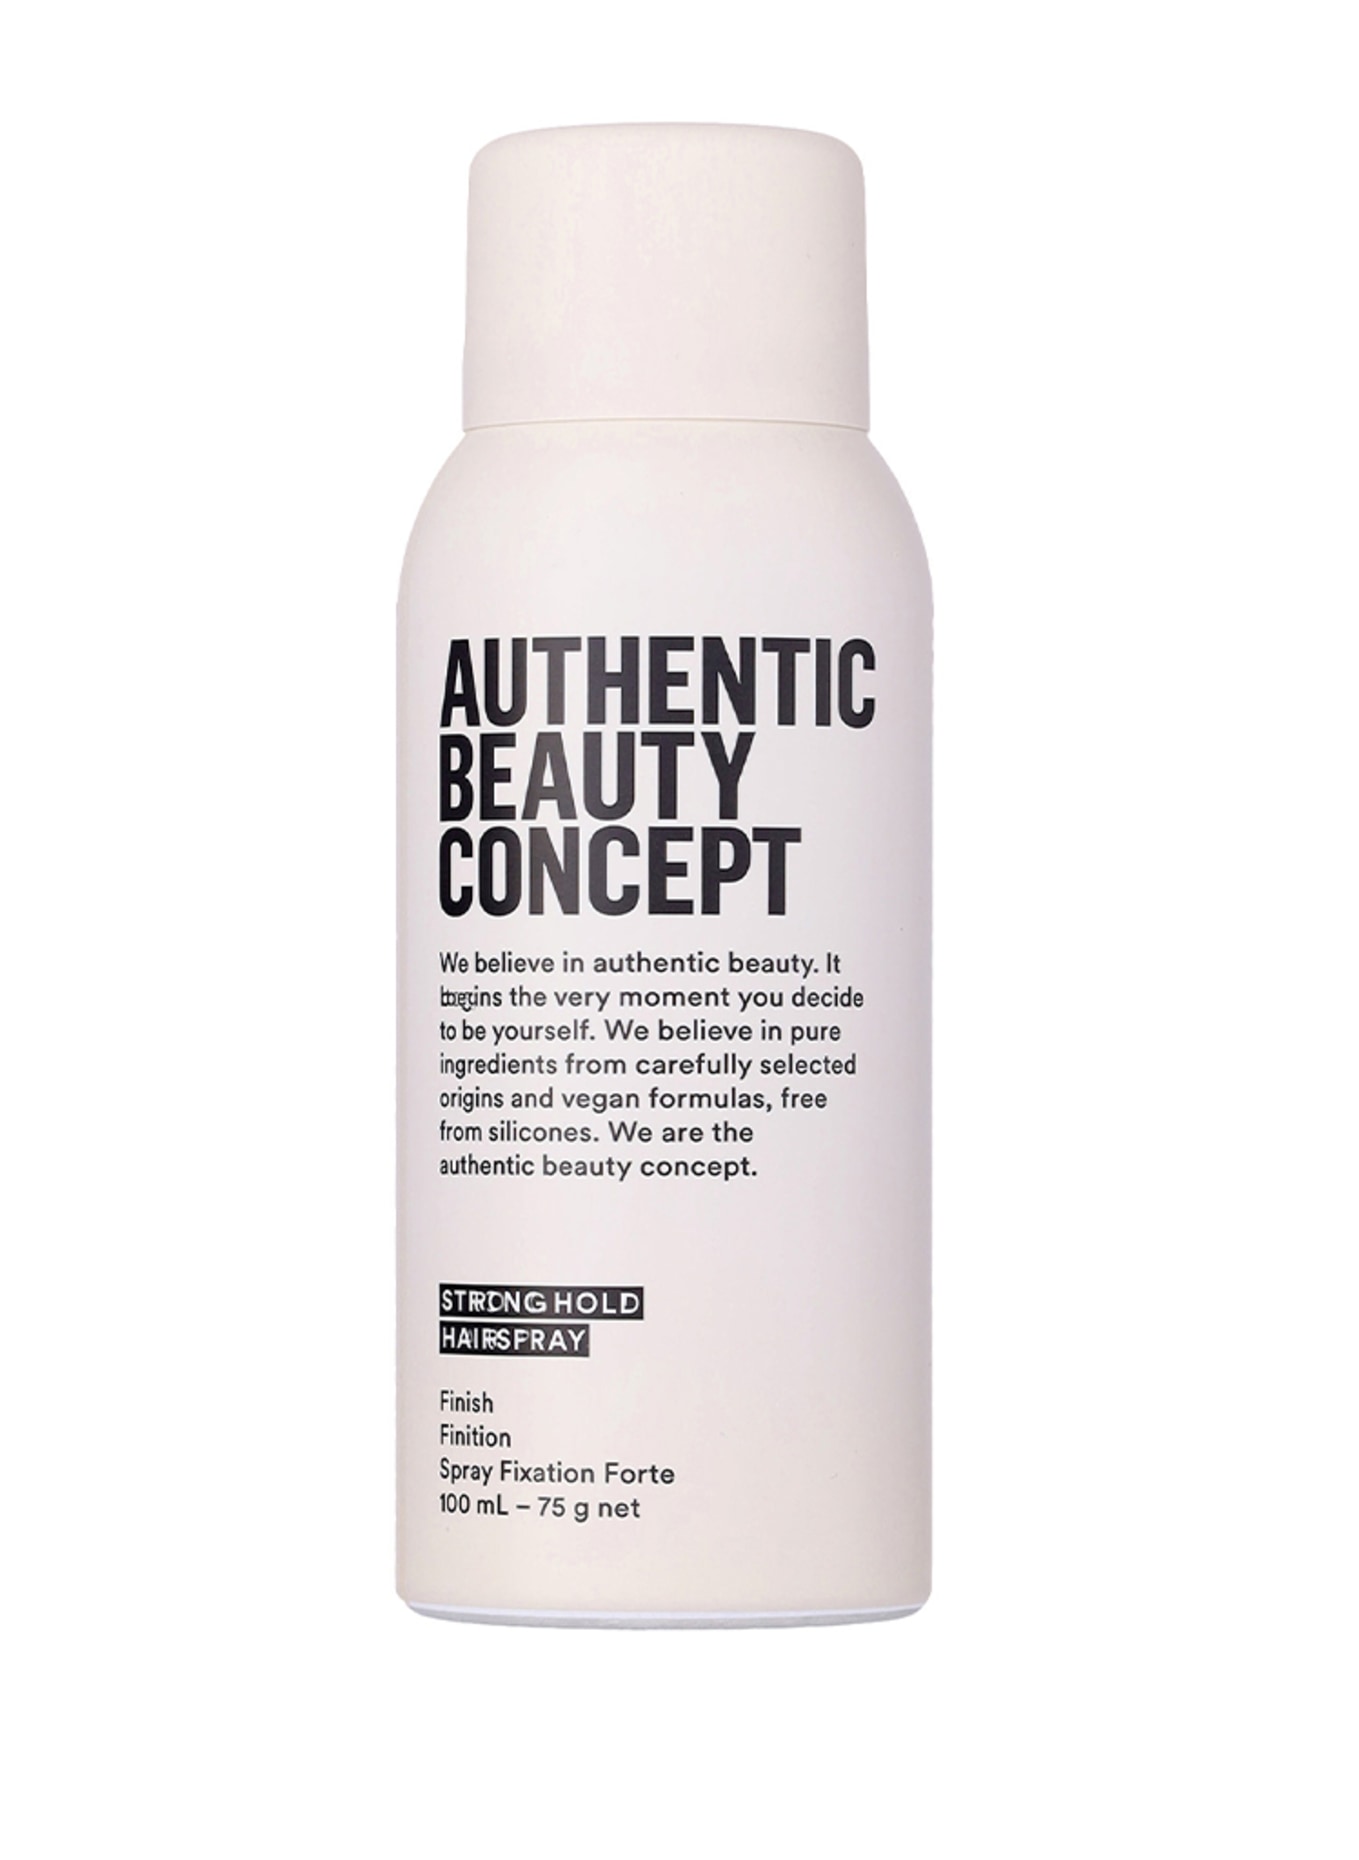 AUTHENTIC BEAUTY CONCEPT STRONG HOLD HAIRSPRAY (Bild 1)